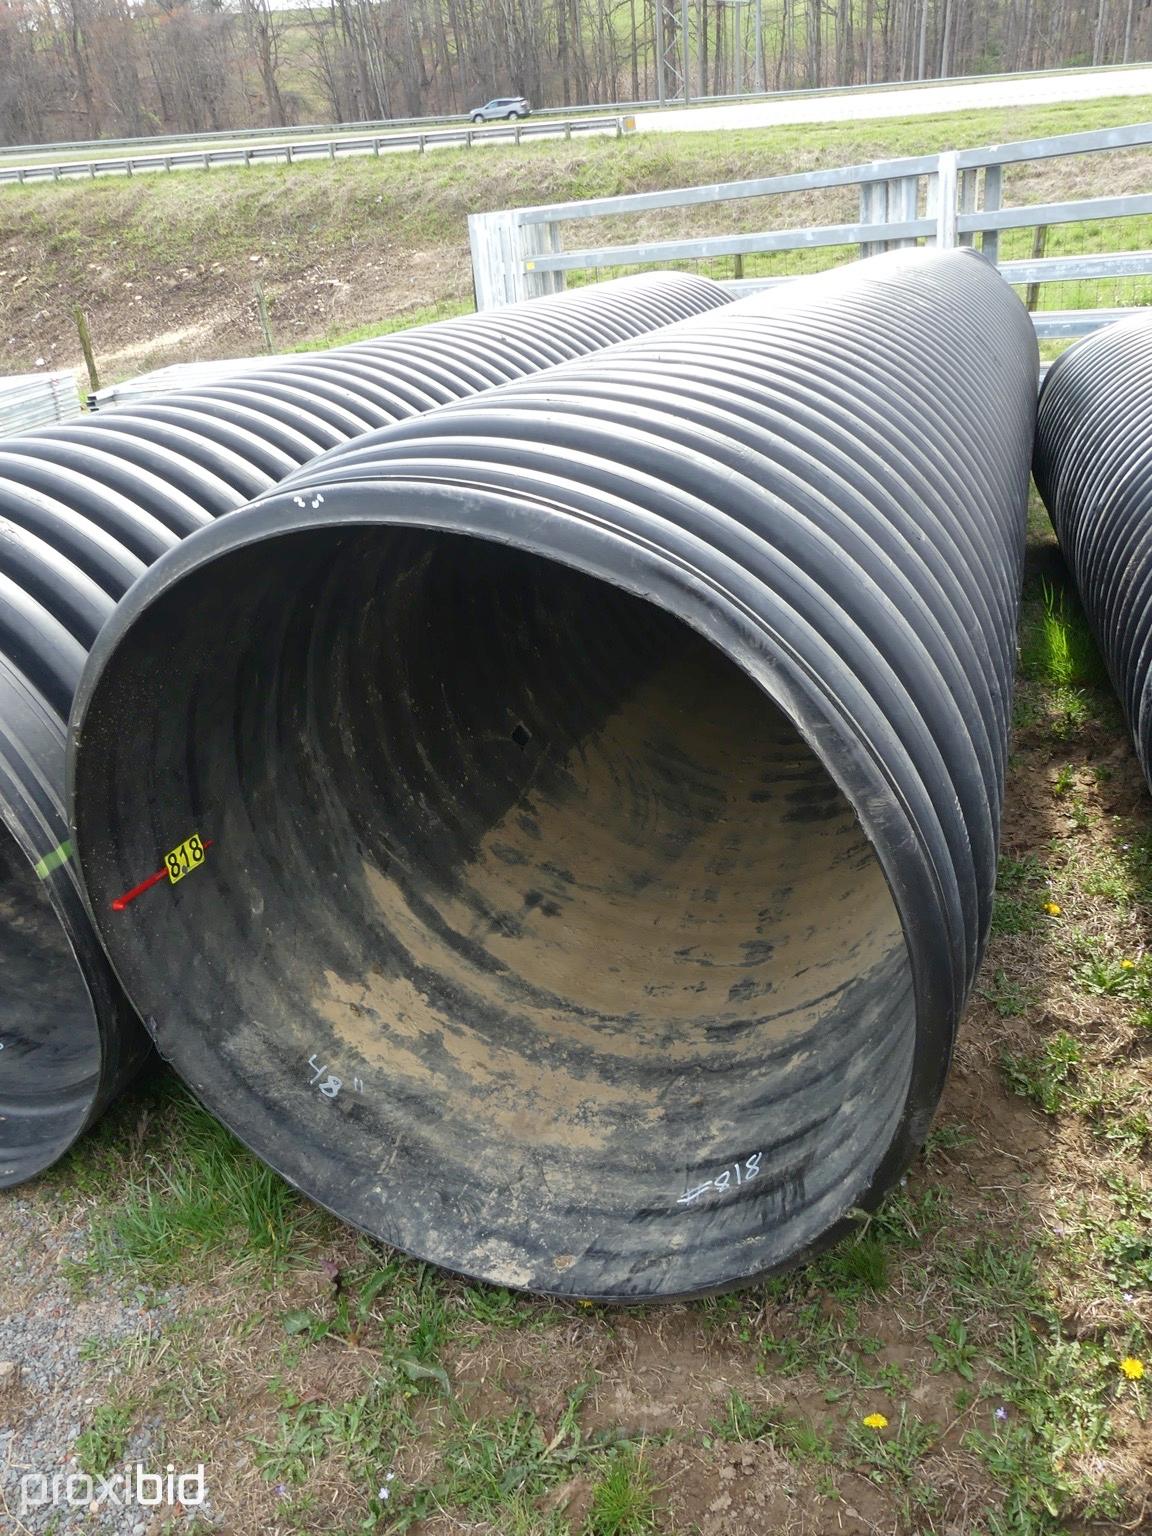 48 INCH OD 20FT CULVERT - DOUBLE WALL